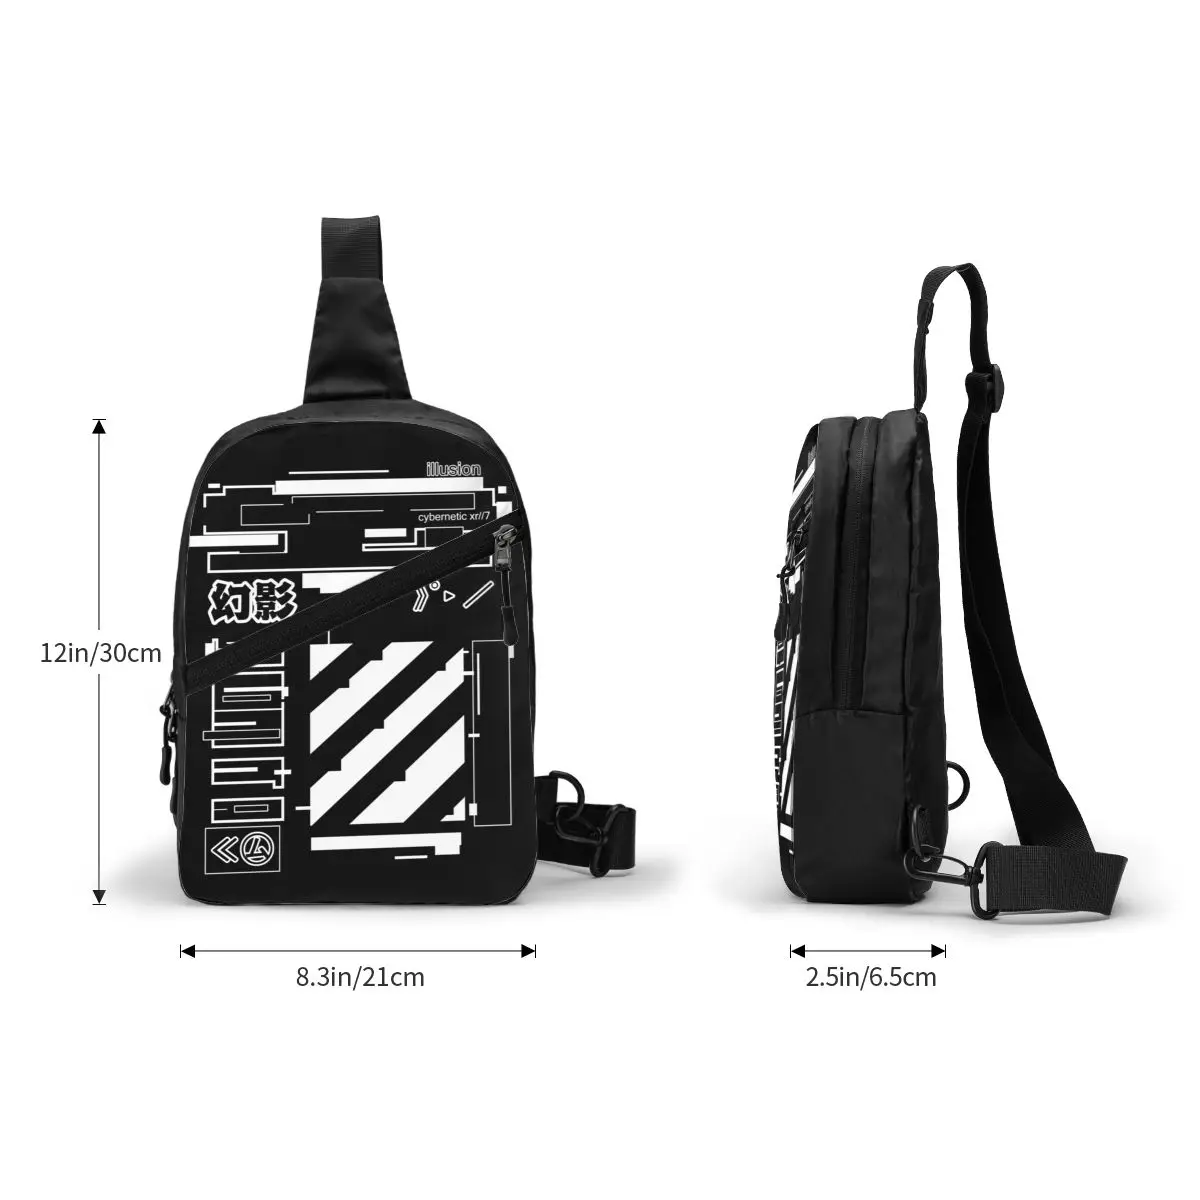 Illusion Techwear Sling Chest Crossbody Bag Men Casual Tokyo Future Tech Street Wear Style Shoulder Backpack for Travel Cycling